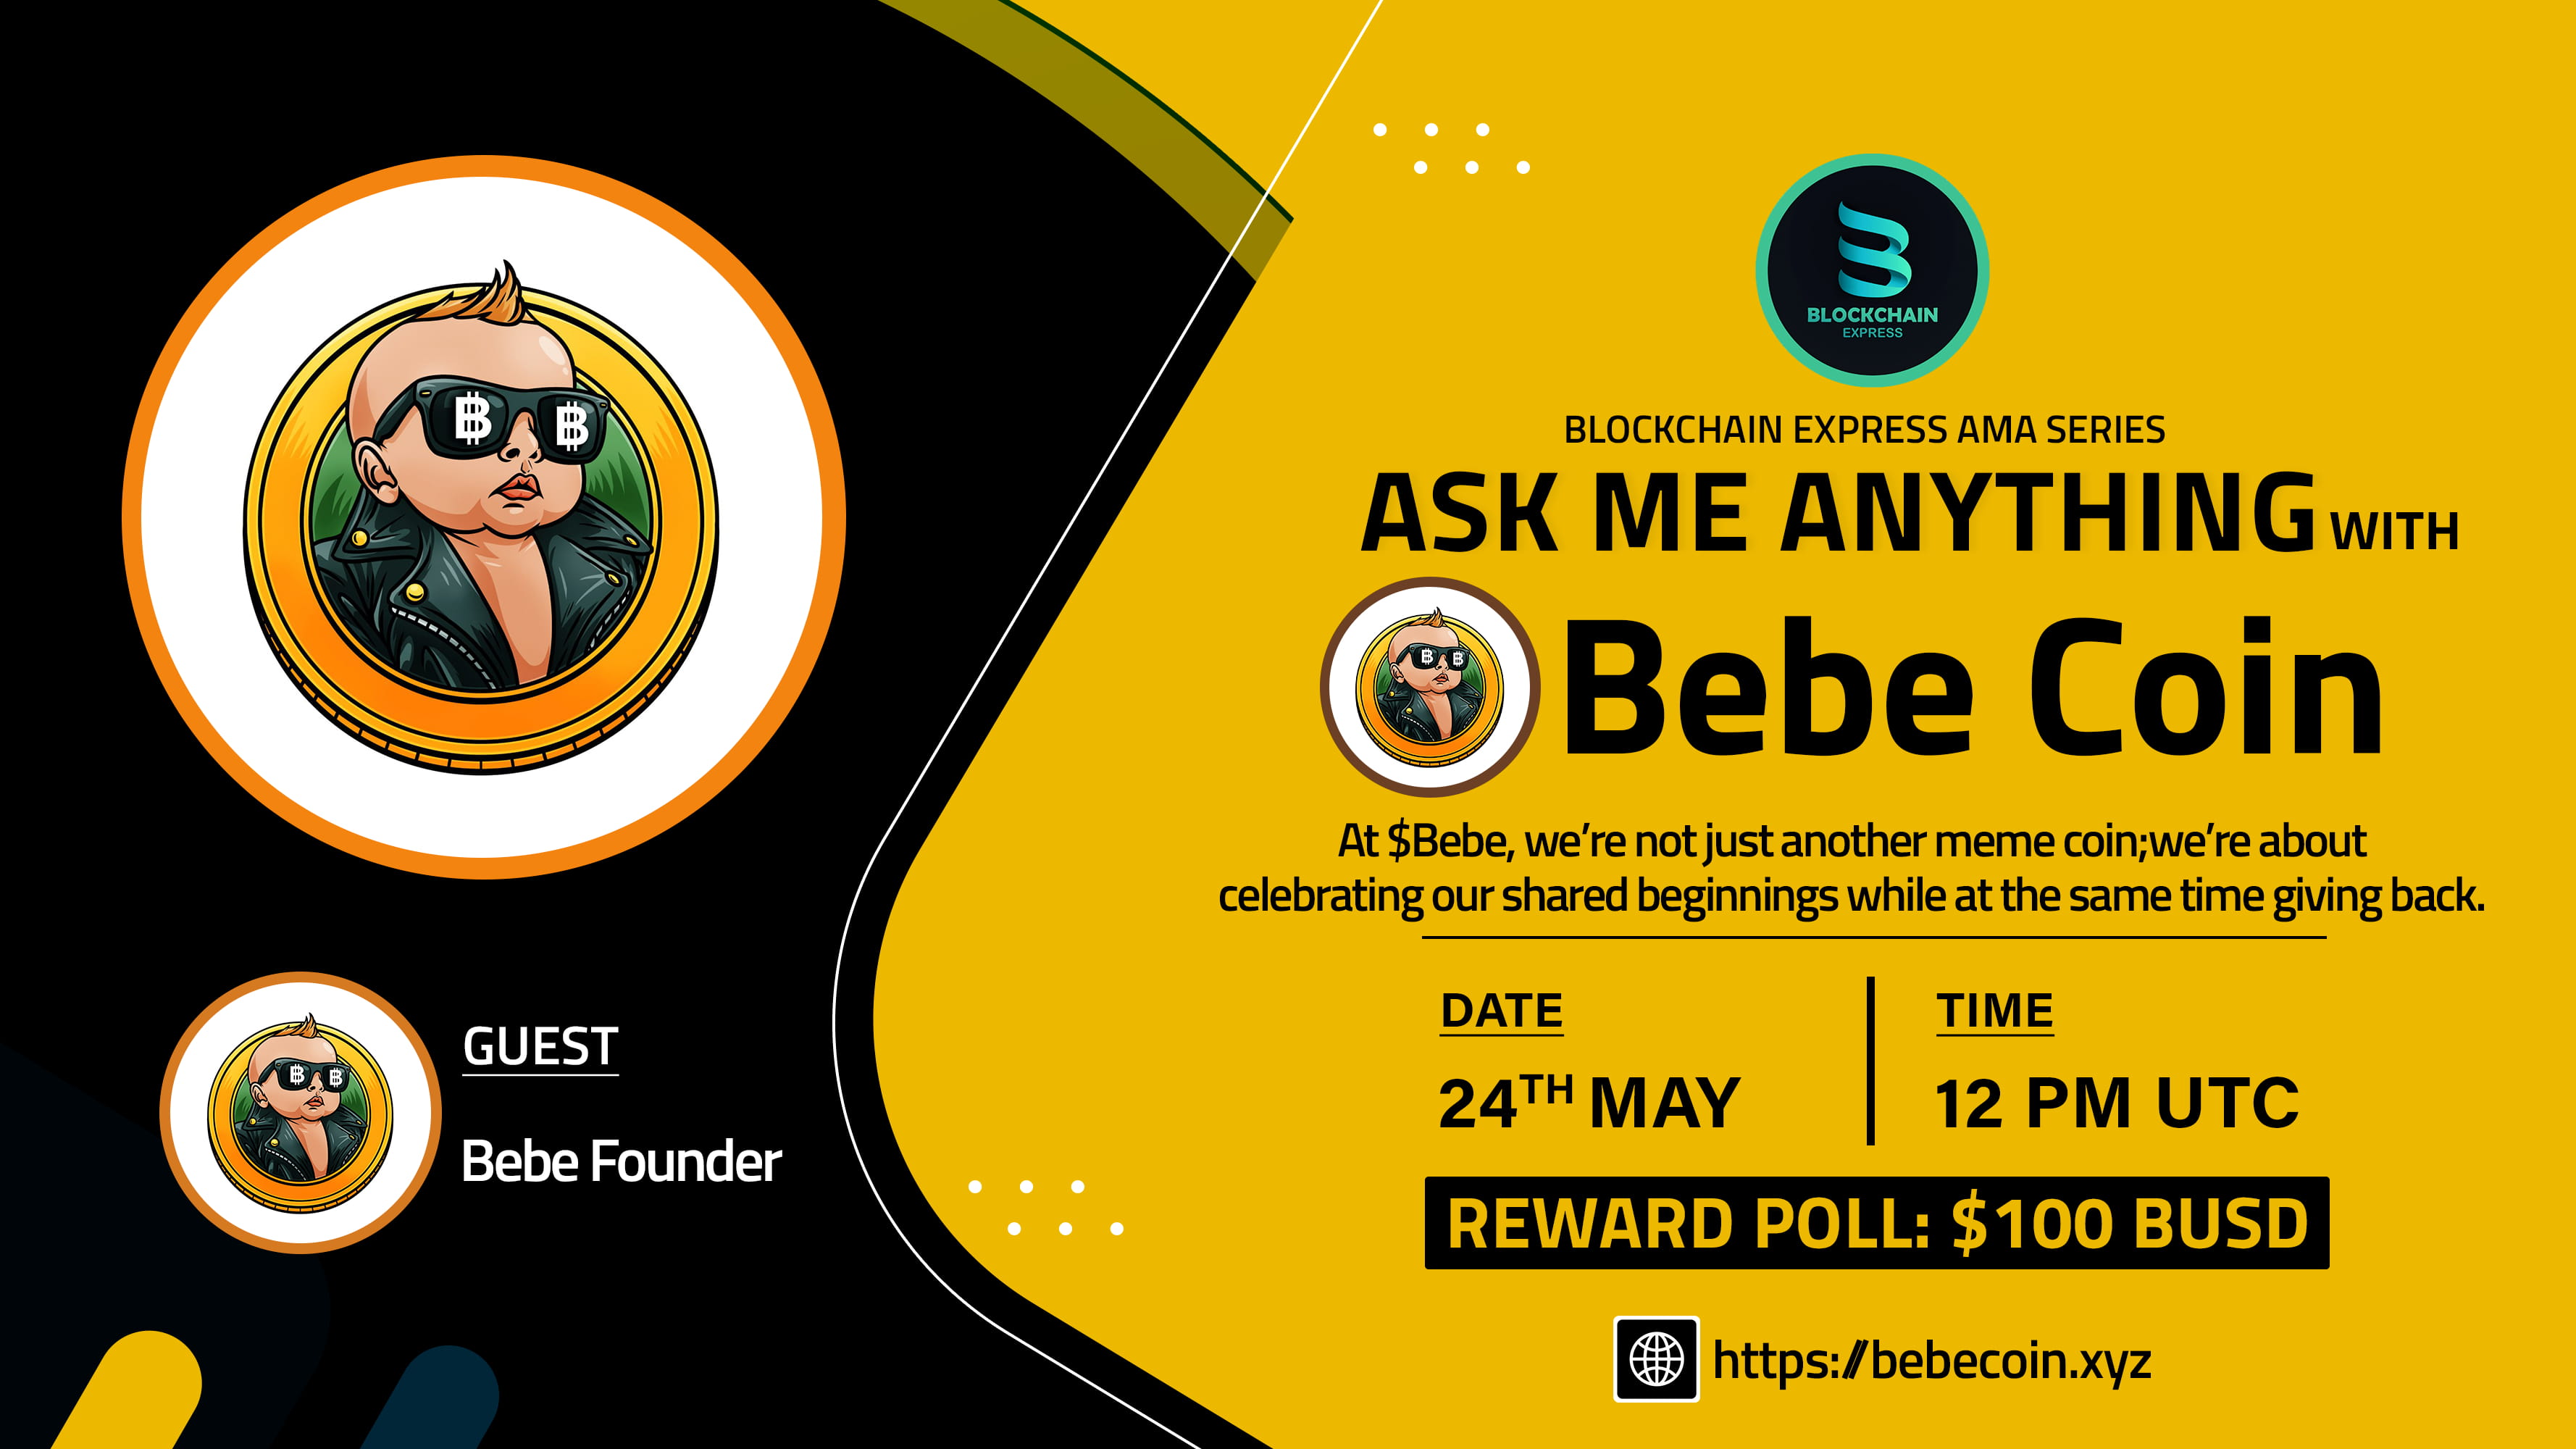 ₿lockchain Express will be hosting an AMA session with" Bebe Coin "